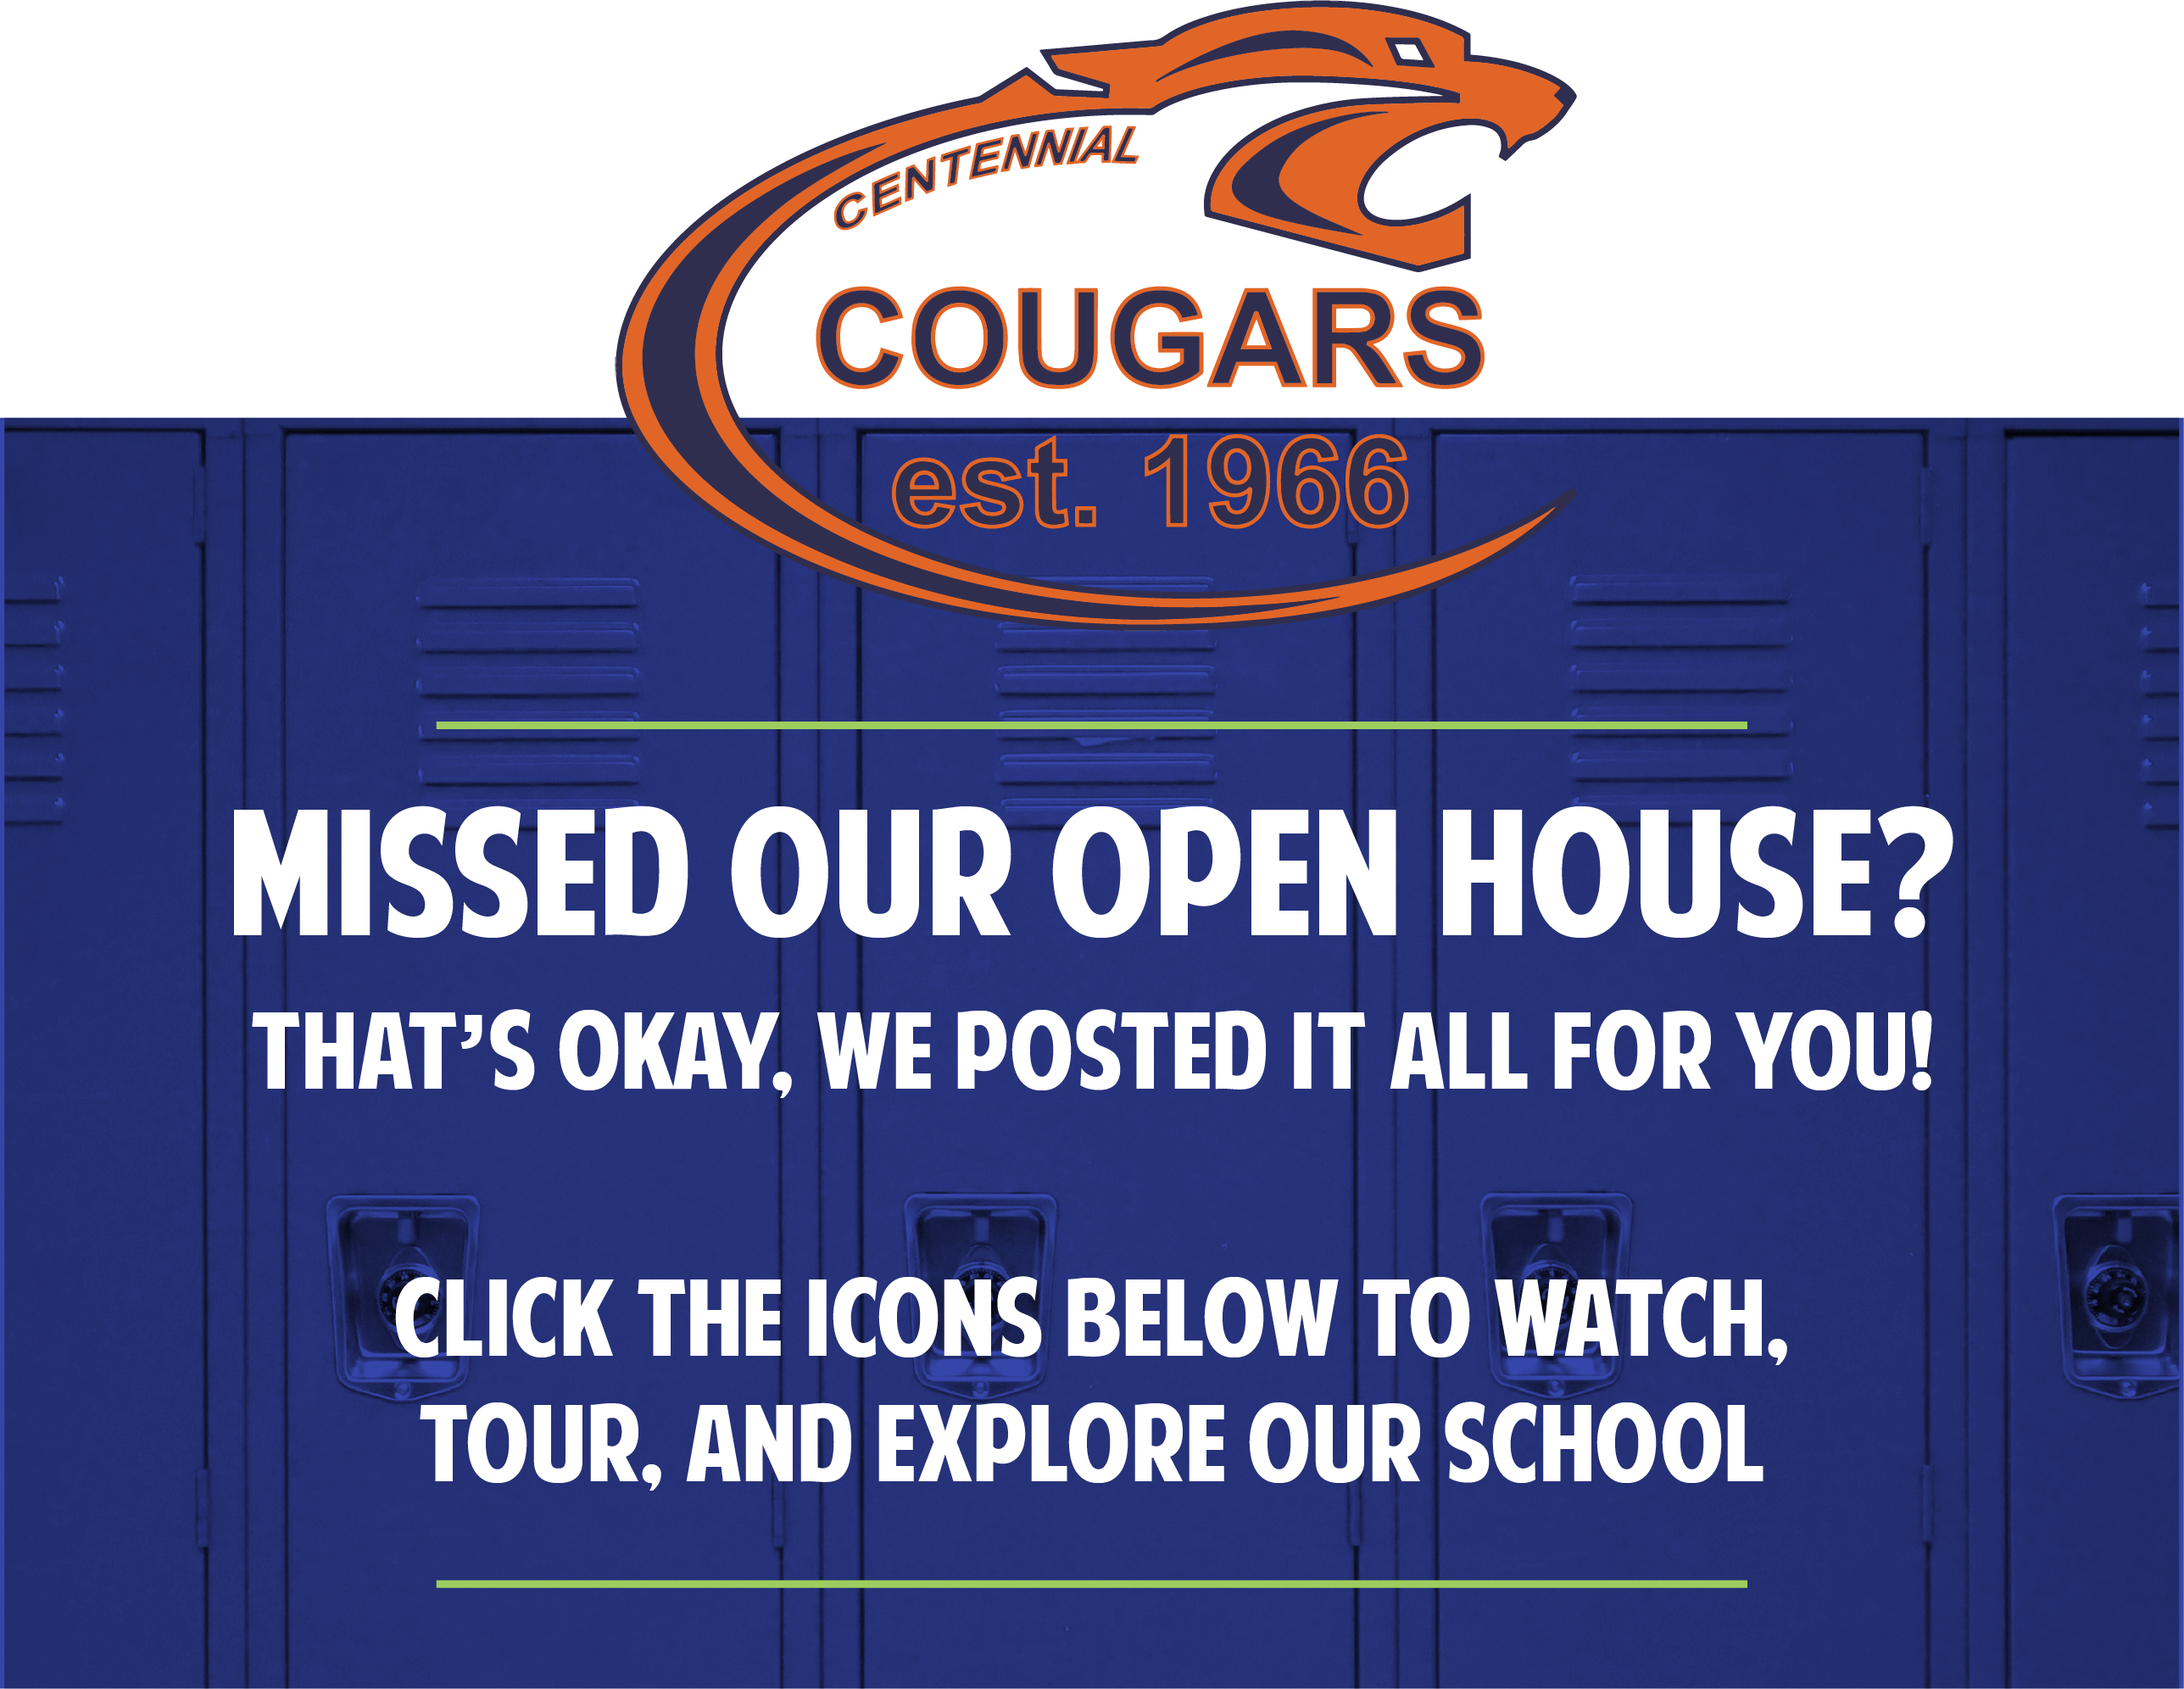 Missed our open house?  Thats okay, click below to explore our school